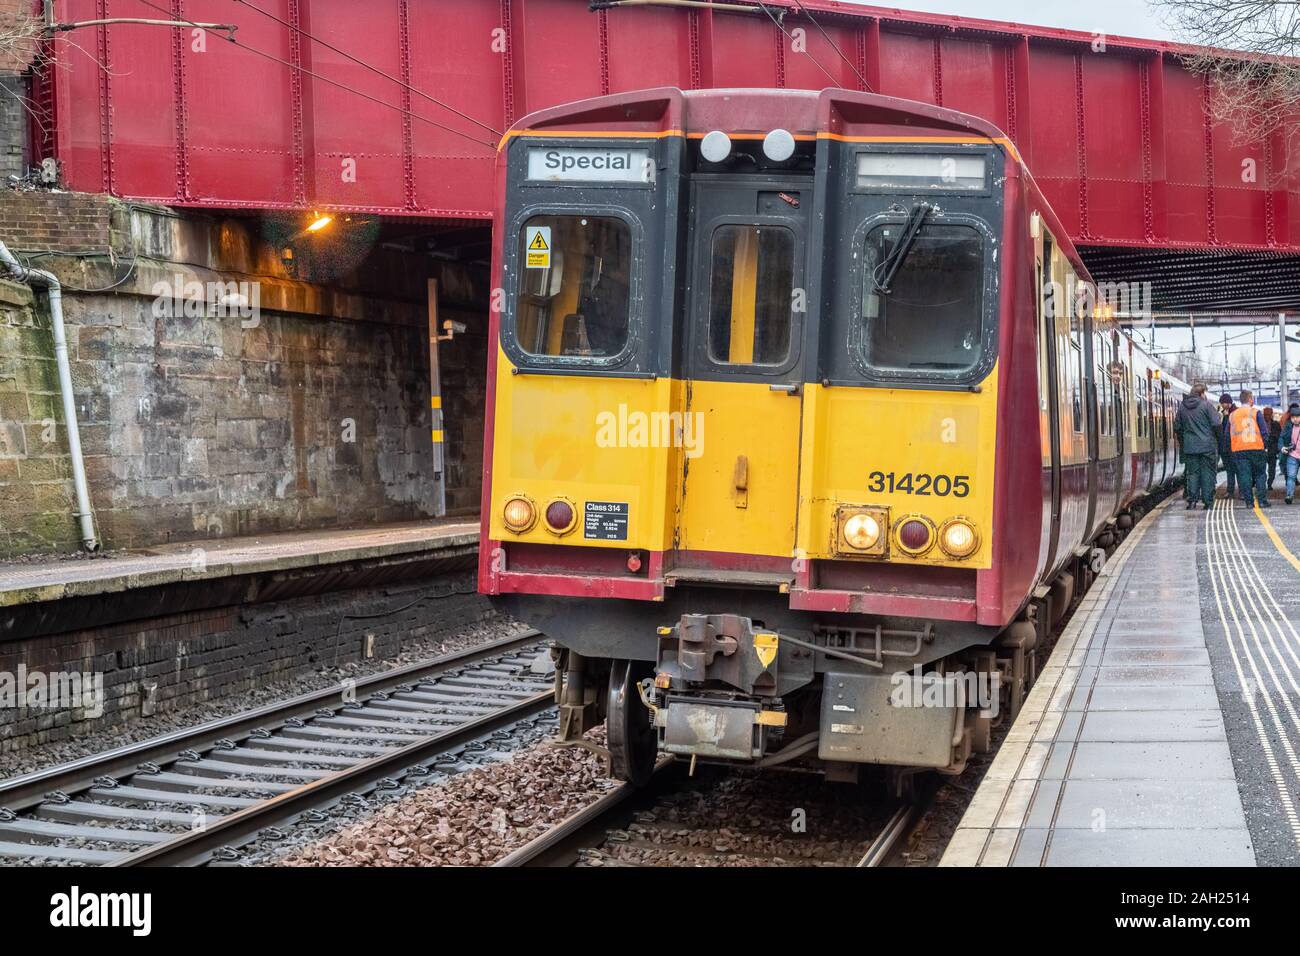 On Wednesday 18th December 2019 Scotrail operated a Class 314 electric train farewell tour to mark the retiral of this train class after 40 years Stock Photo